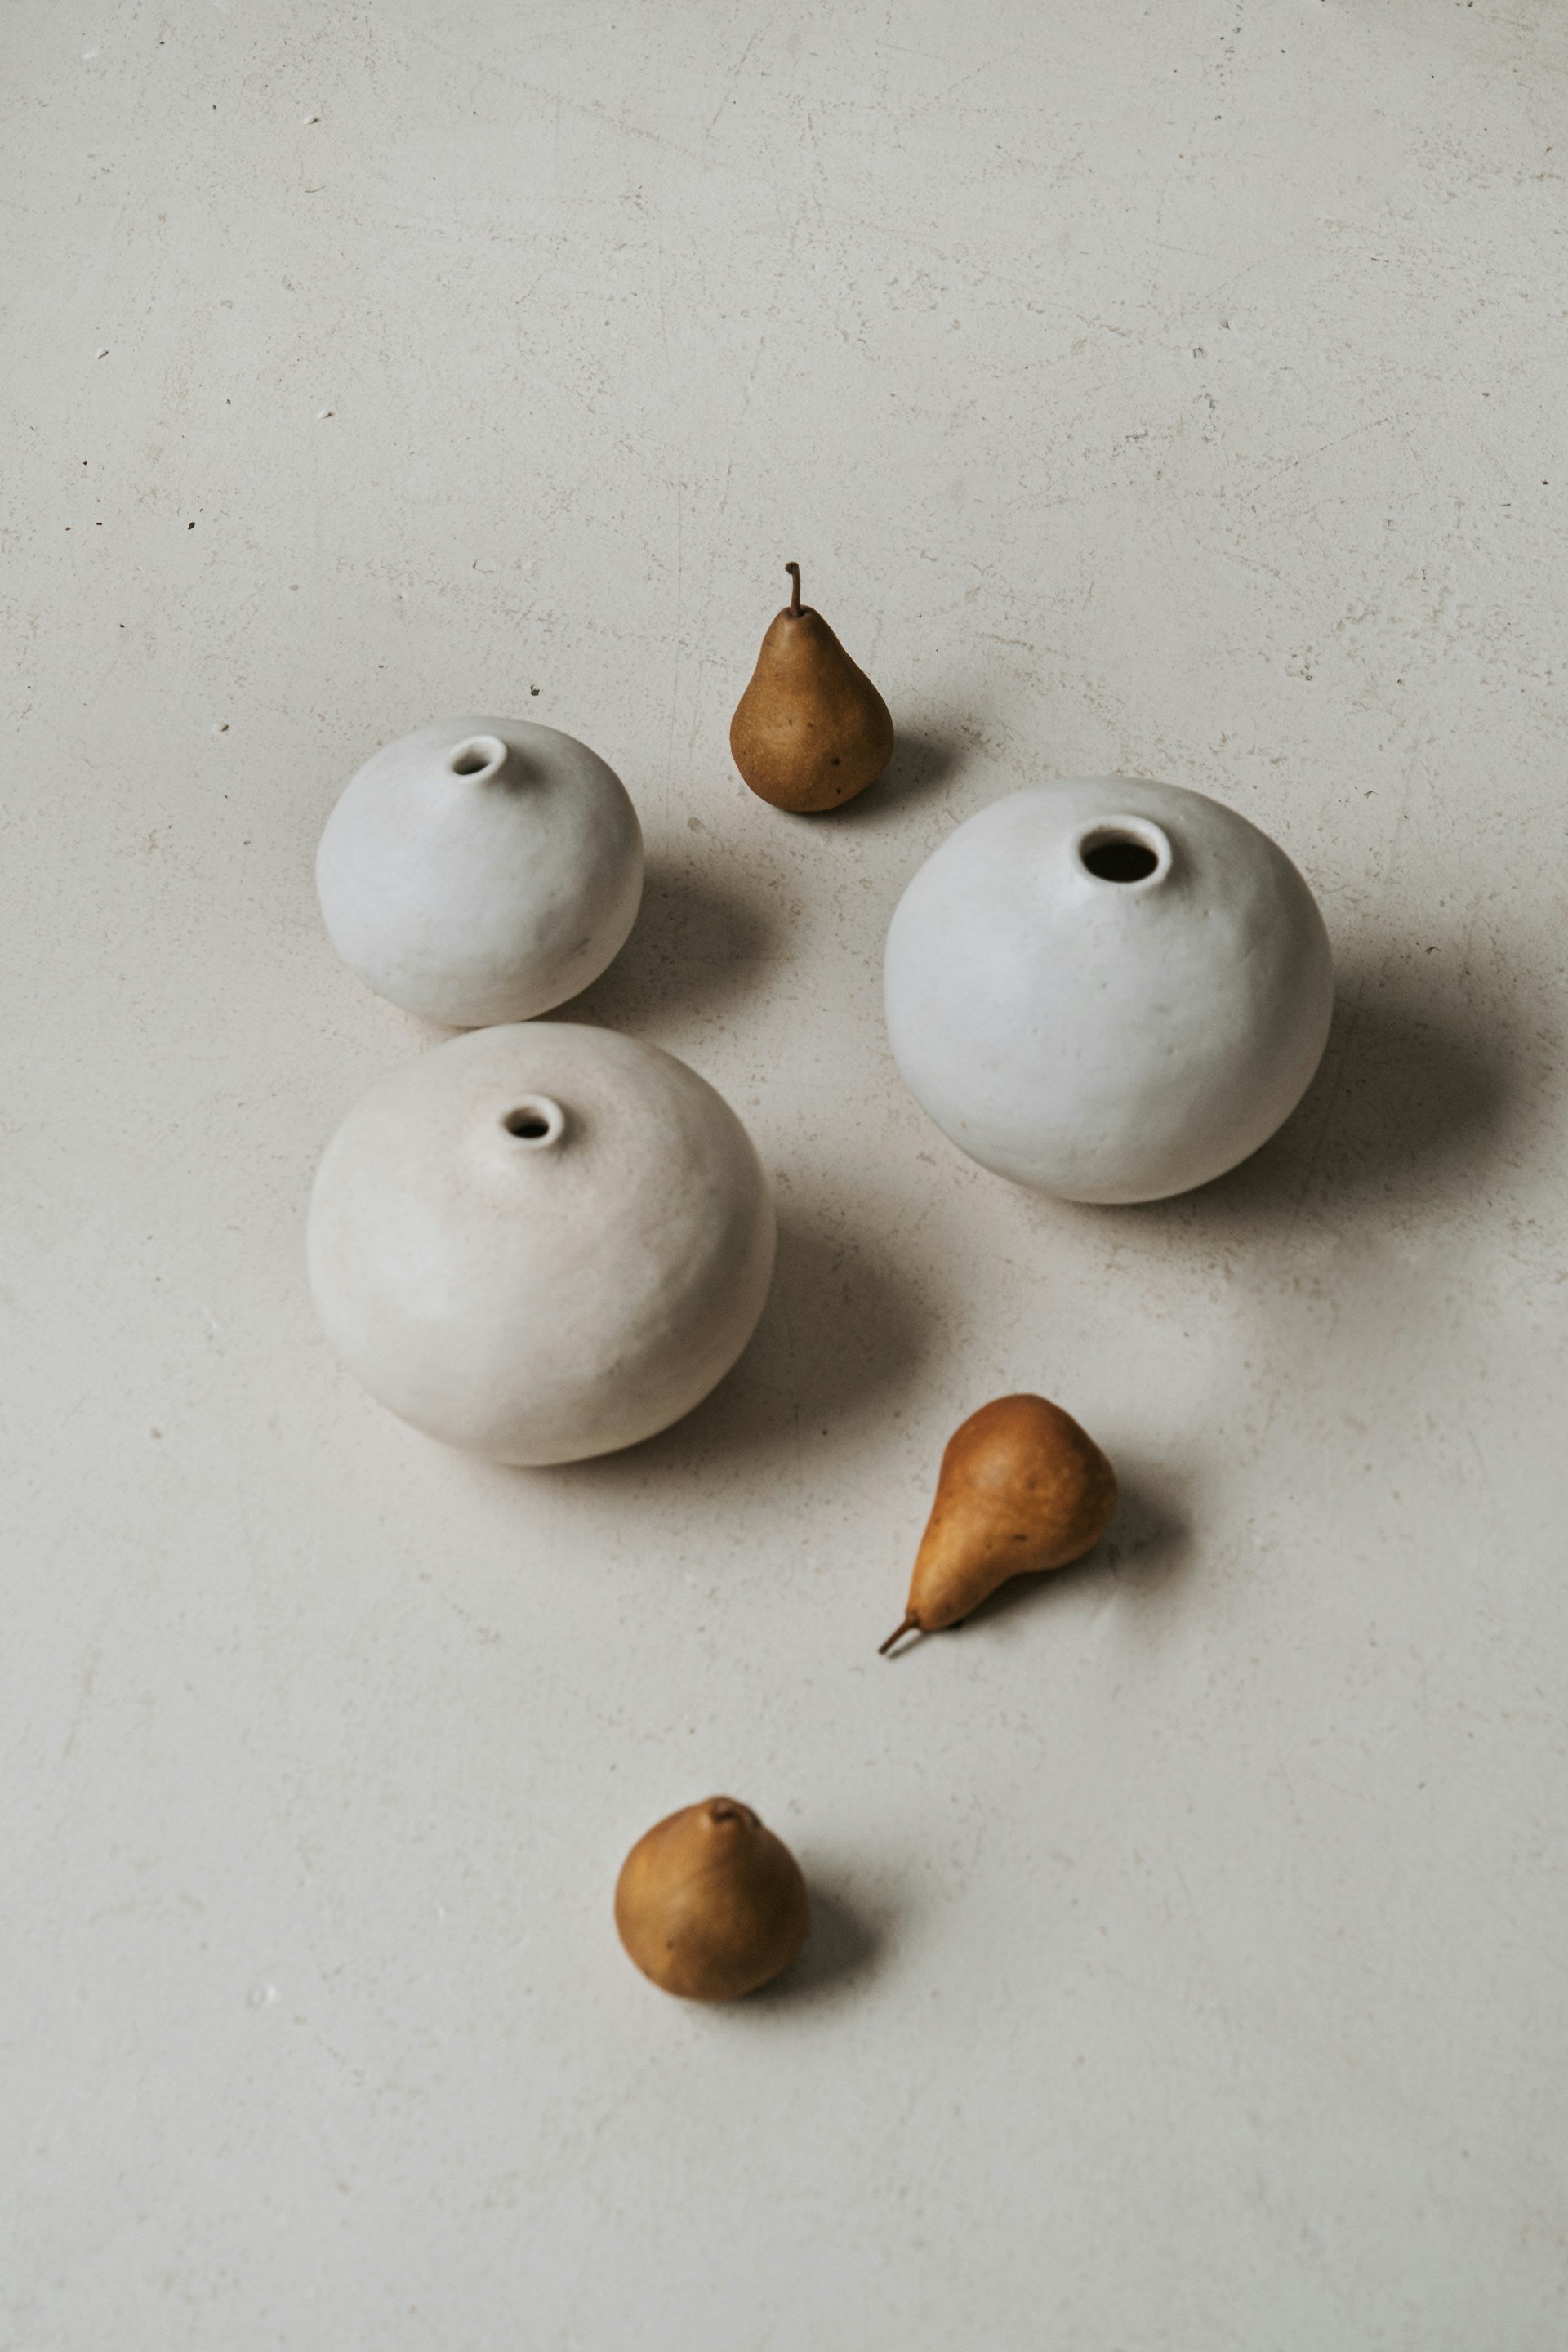 Three vases with pears placed around them.